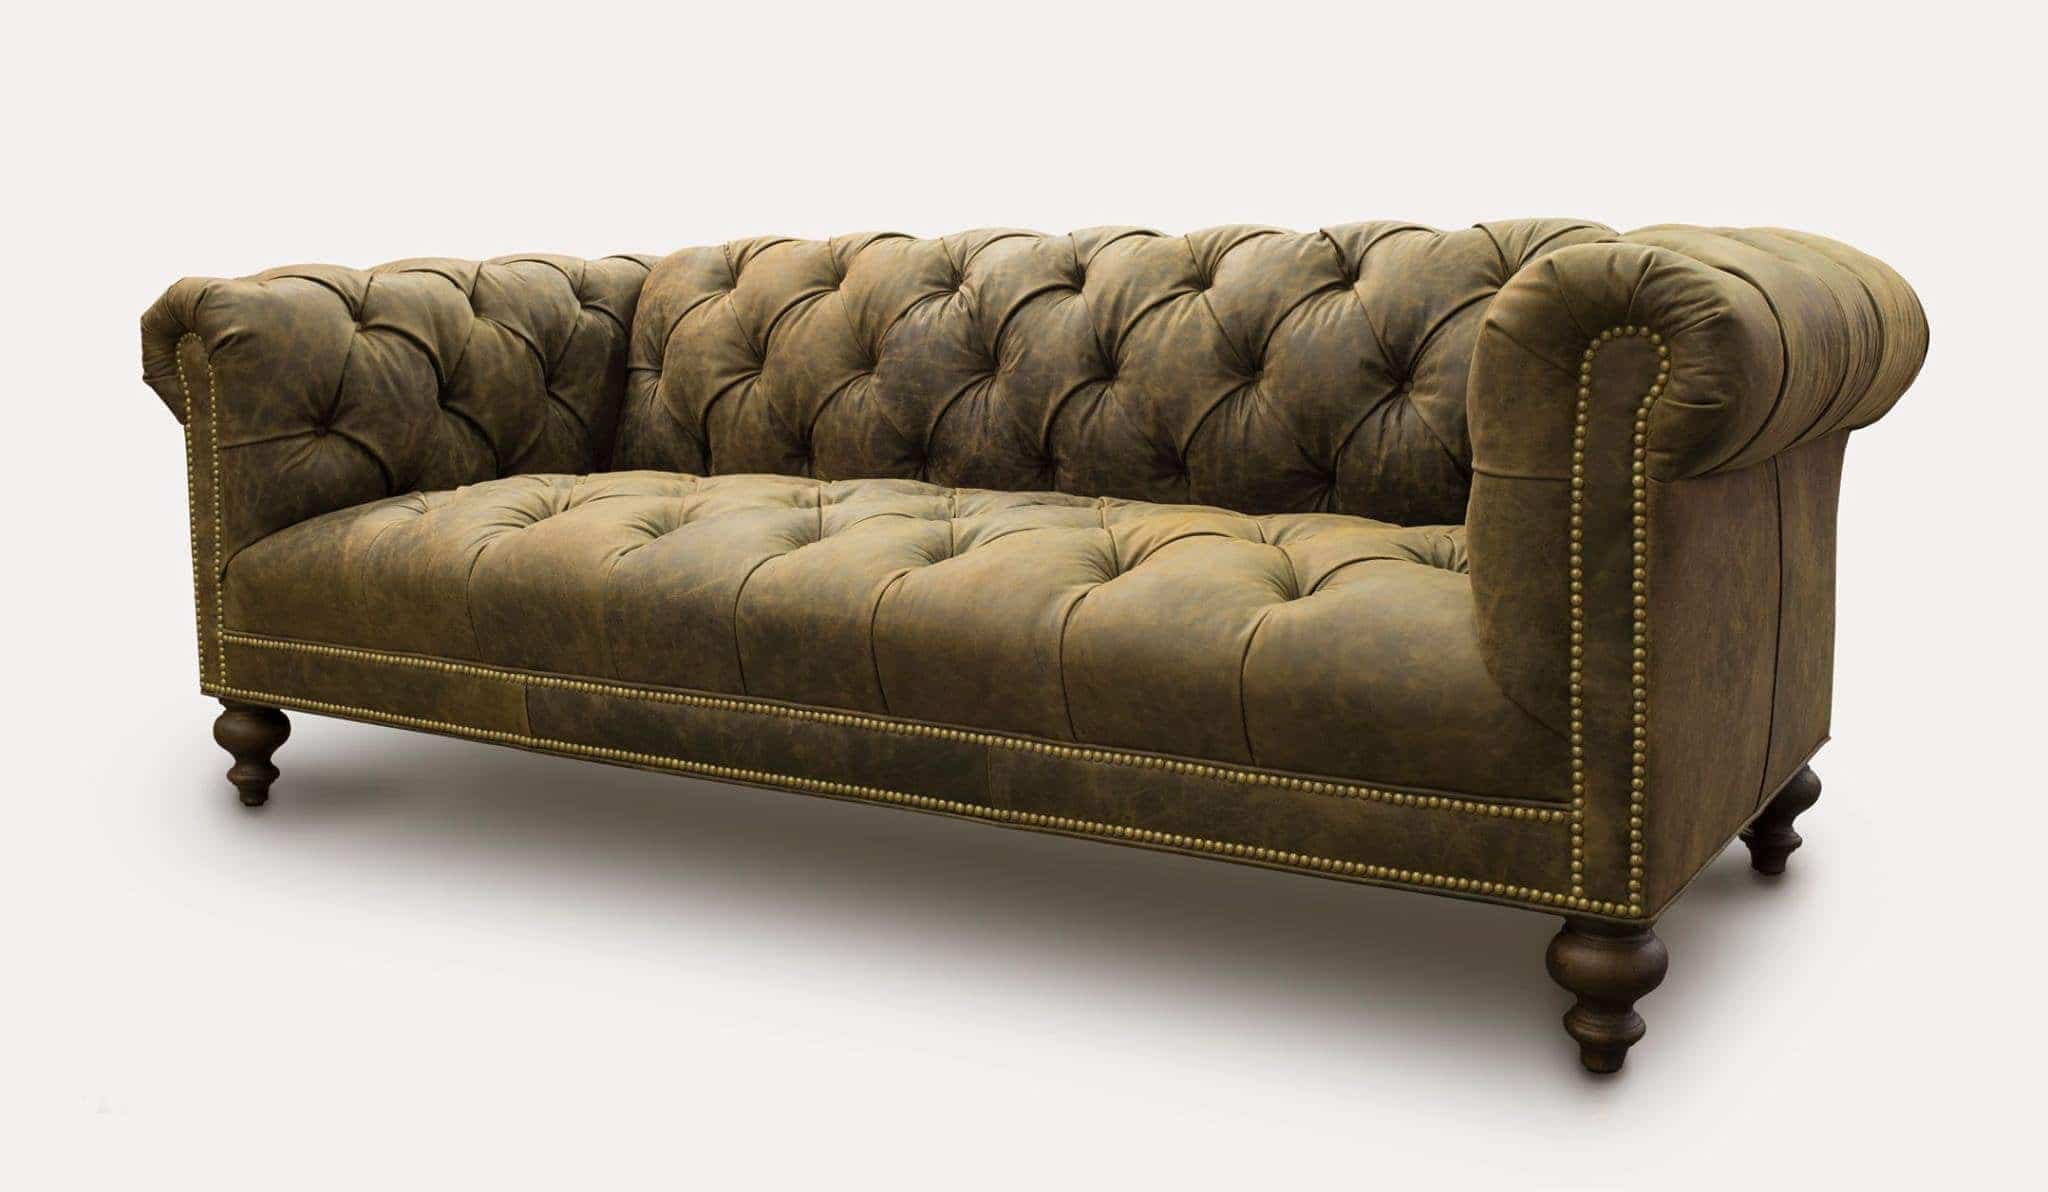 Wright Tufted-Seat Chesterfield Sofa in Vintage Brown Leather